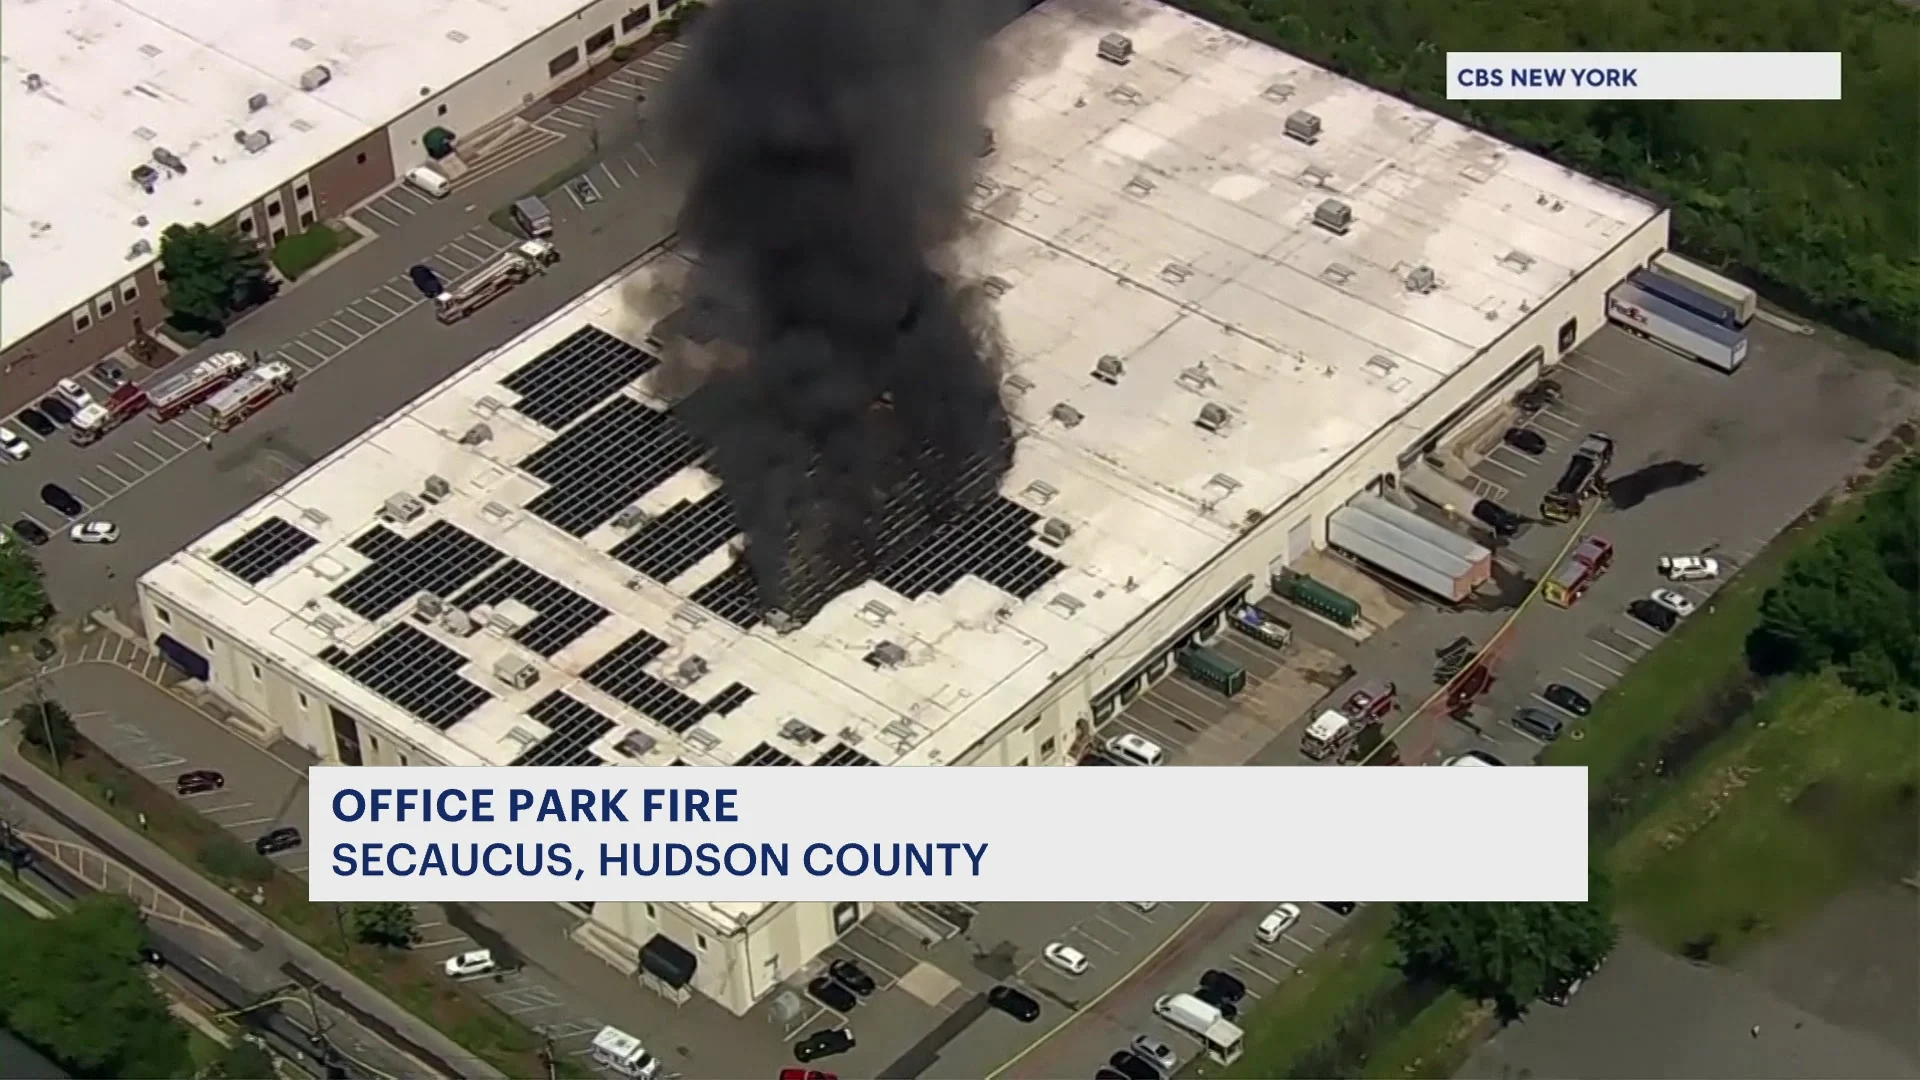 Fire at commercial building in Secaucus sends plumes of smoke into the air